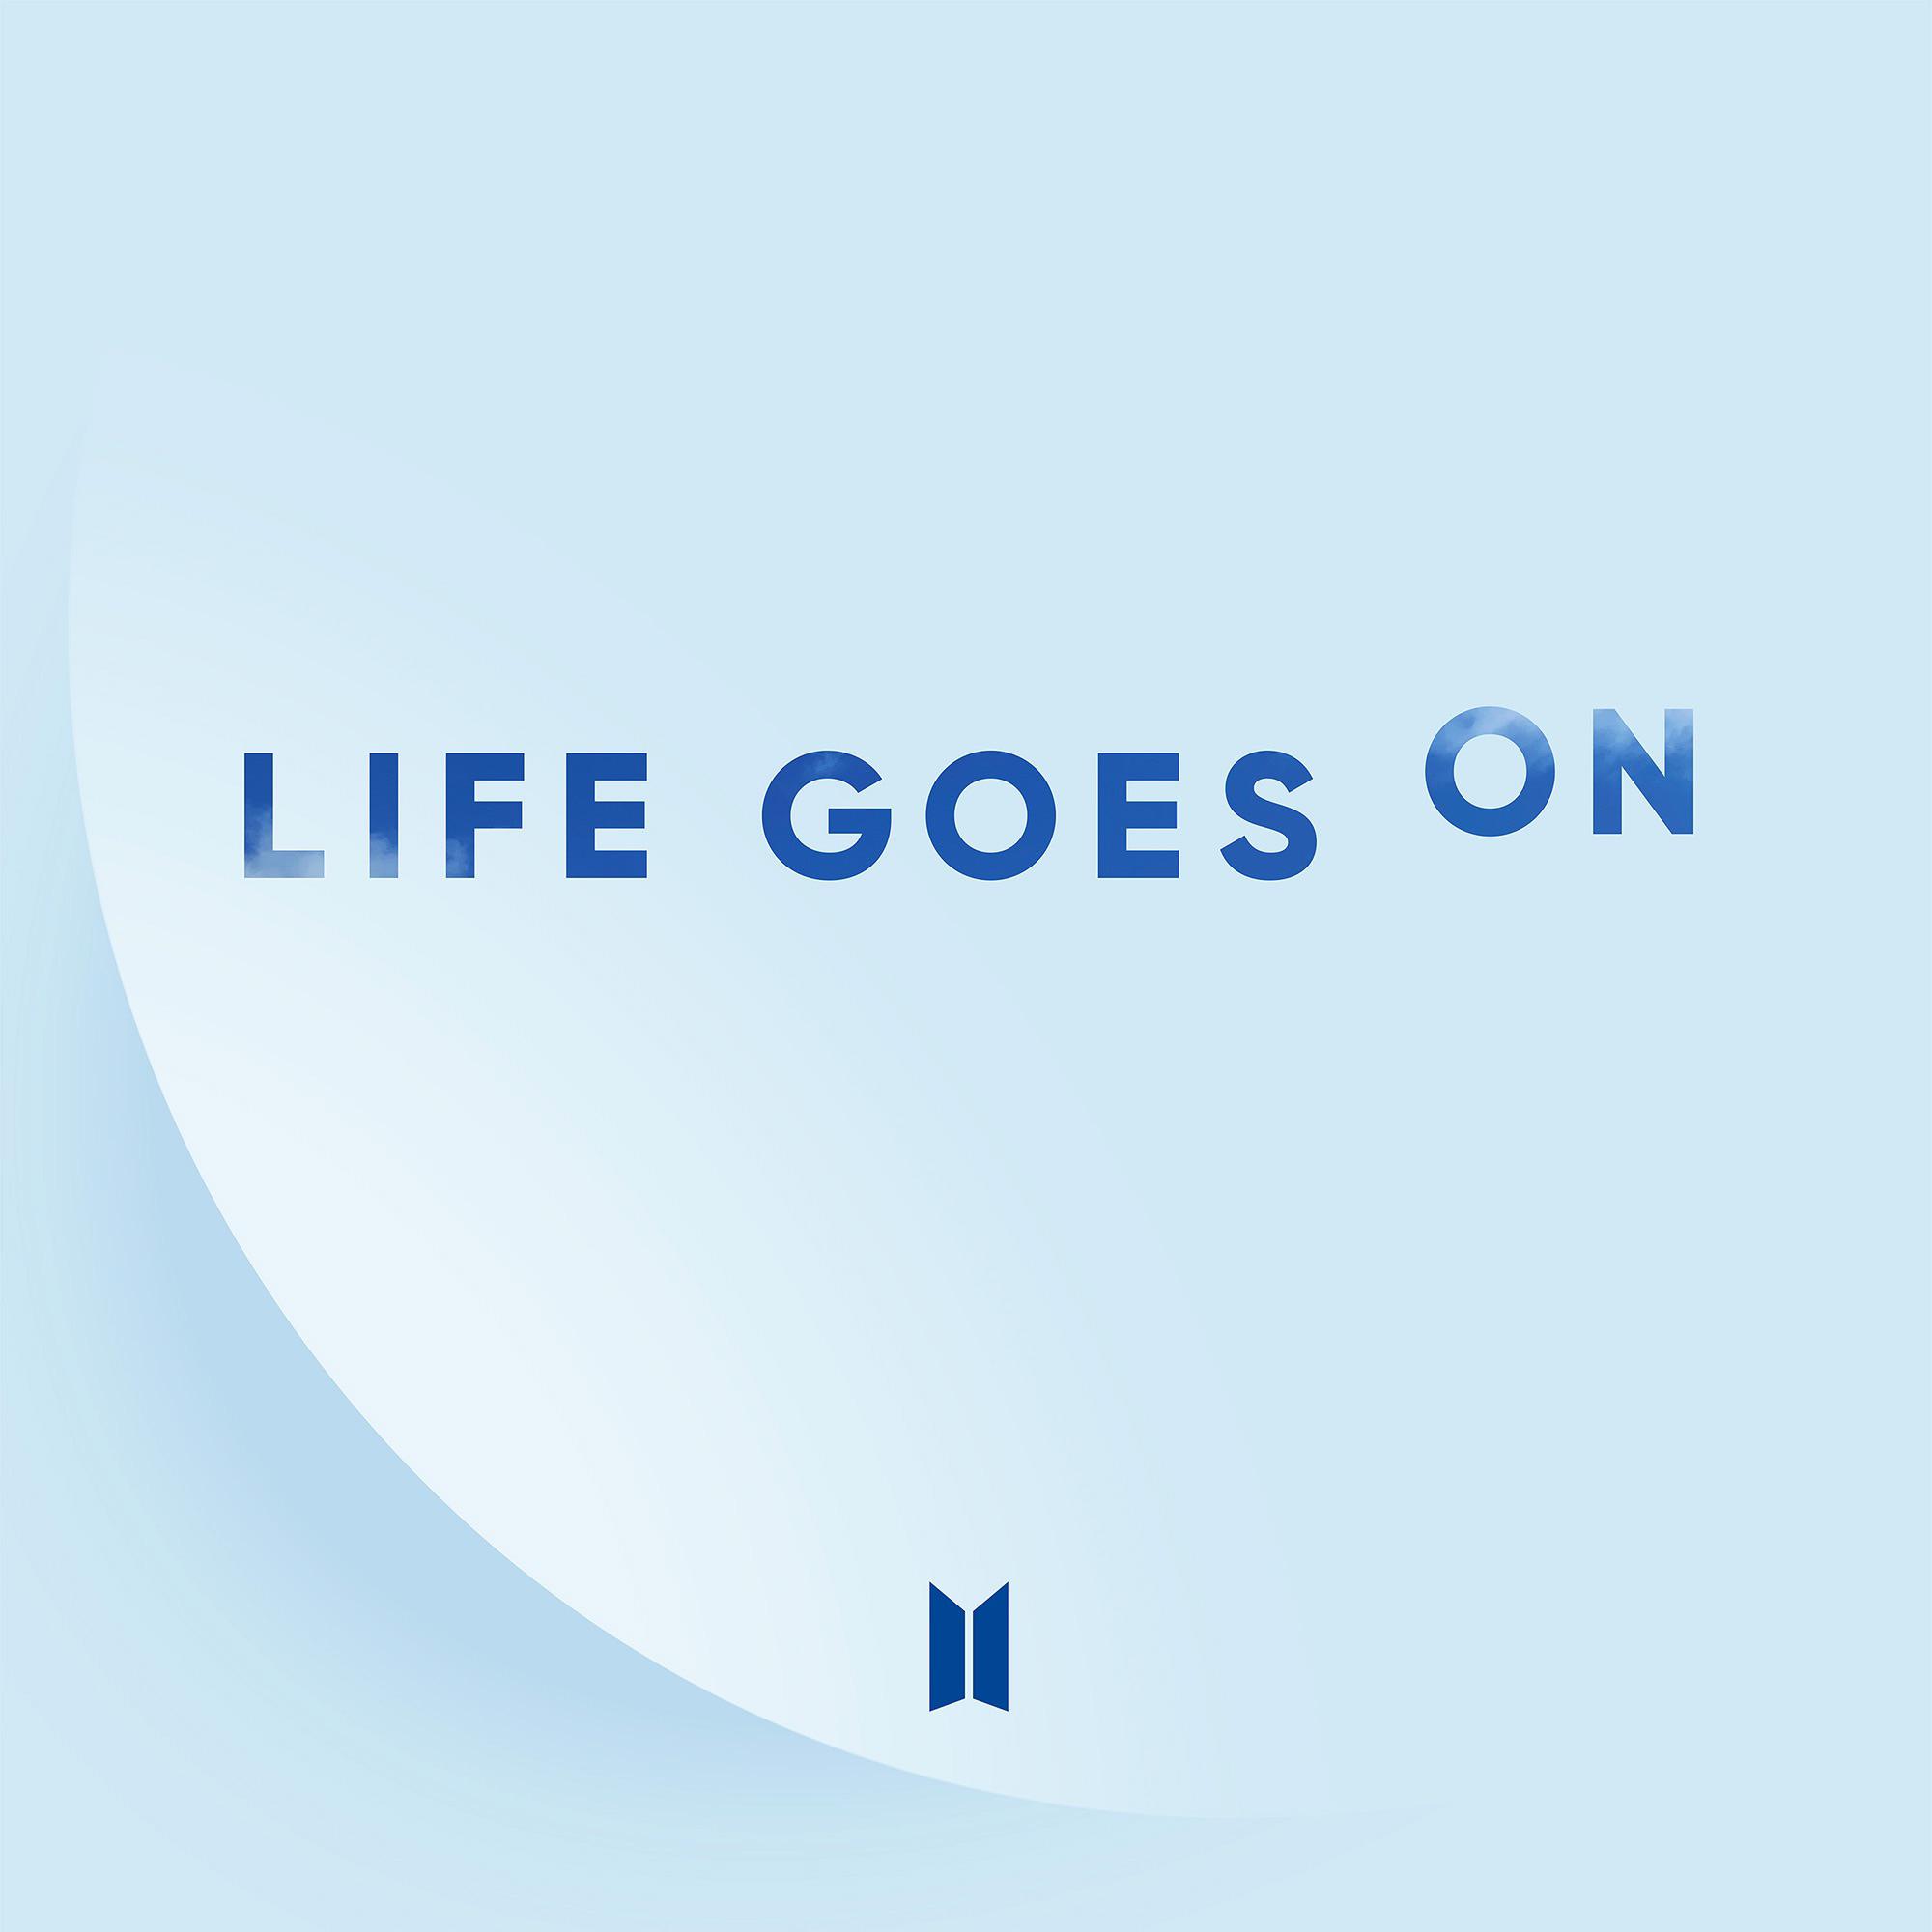 BTS Life Goes On Wallpaper Free BTS Life Goes On Background